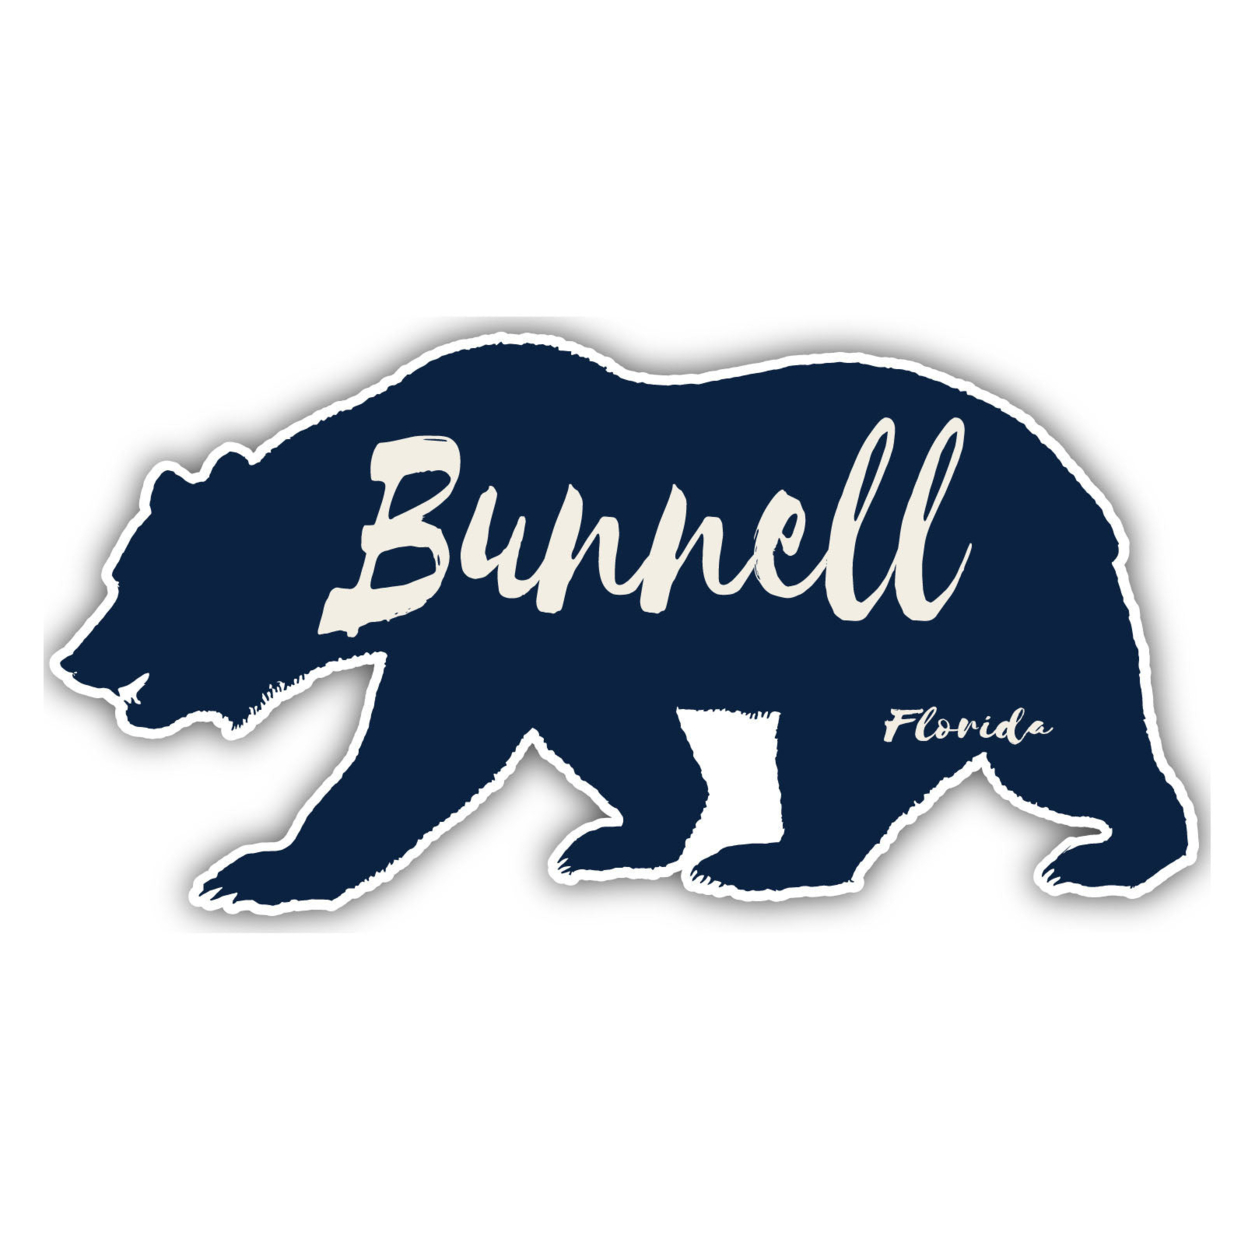 Bunnell Florida Souvenir Decorative Stickers (Choose Theme And Size) - 4-Pack, 6-Inch, Bear